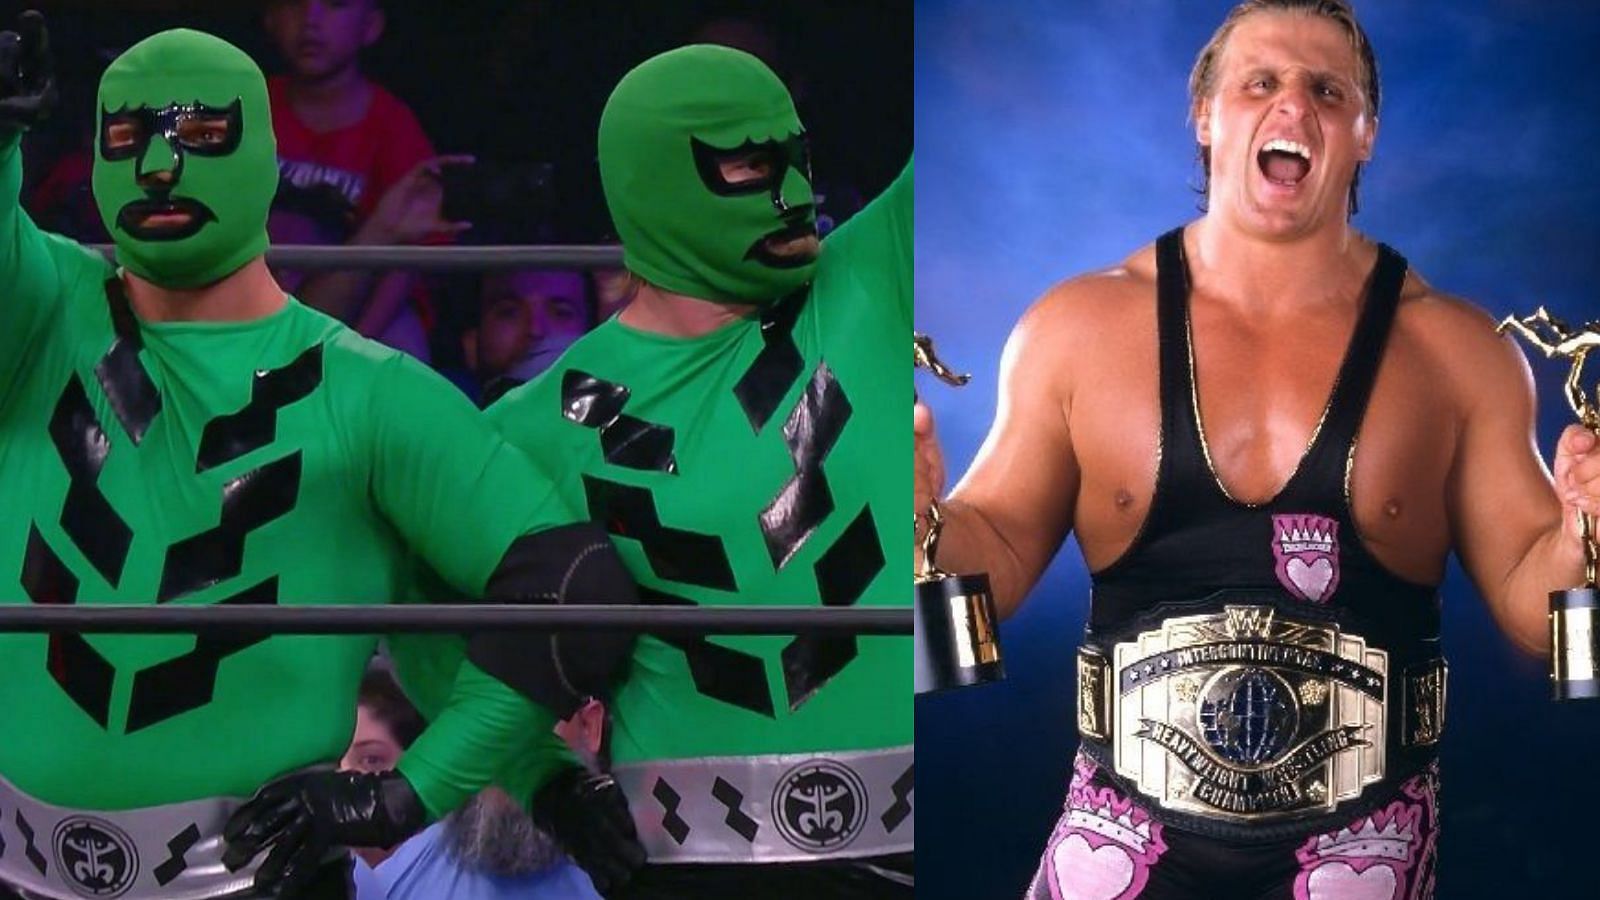 FTR are so excited for the Owen Hart cup that they&#039;d wear the masks to compete if they had to.